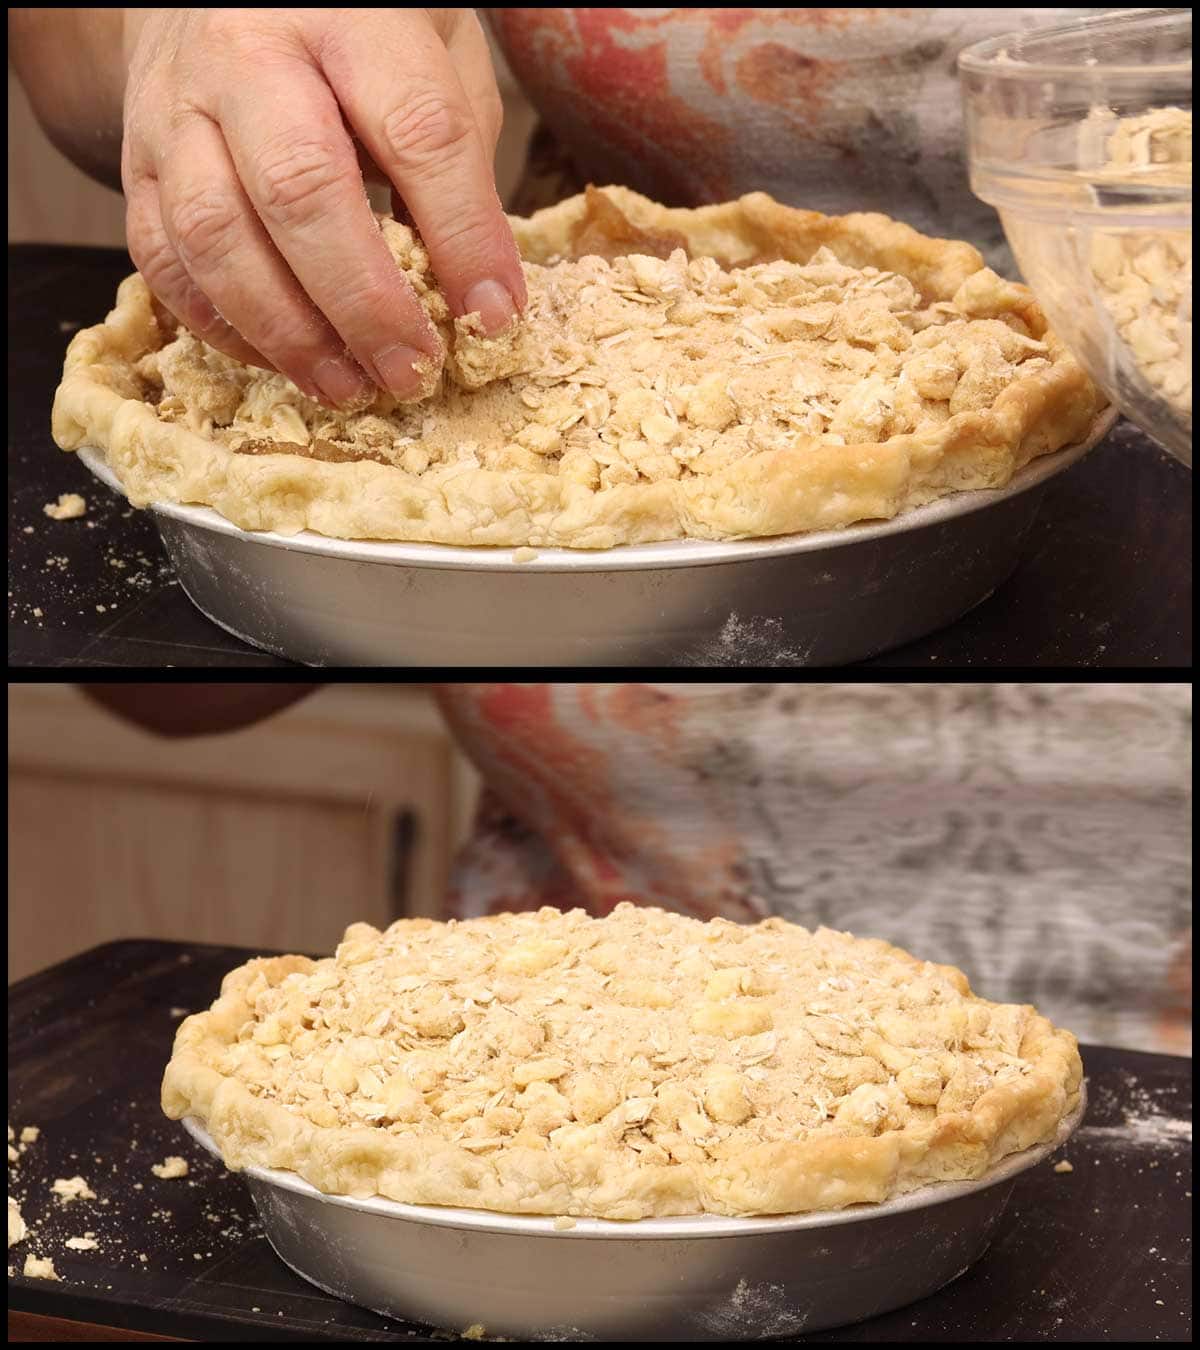 putting the crumb topping on the apple pie